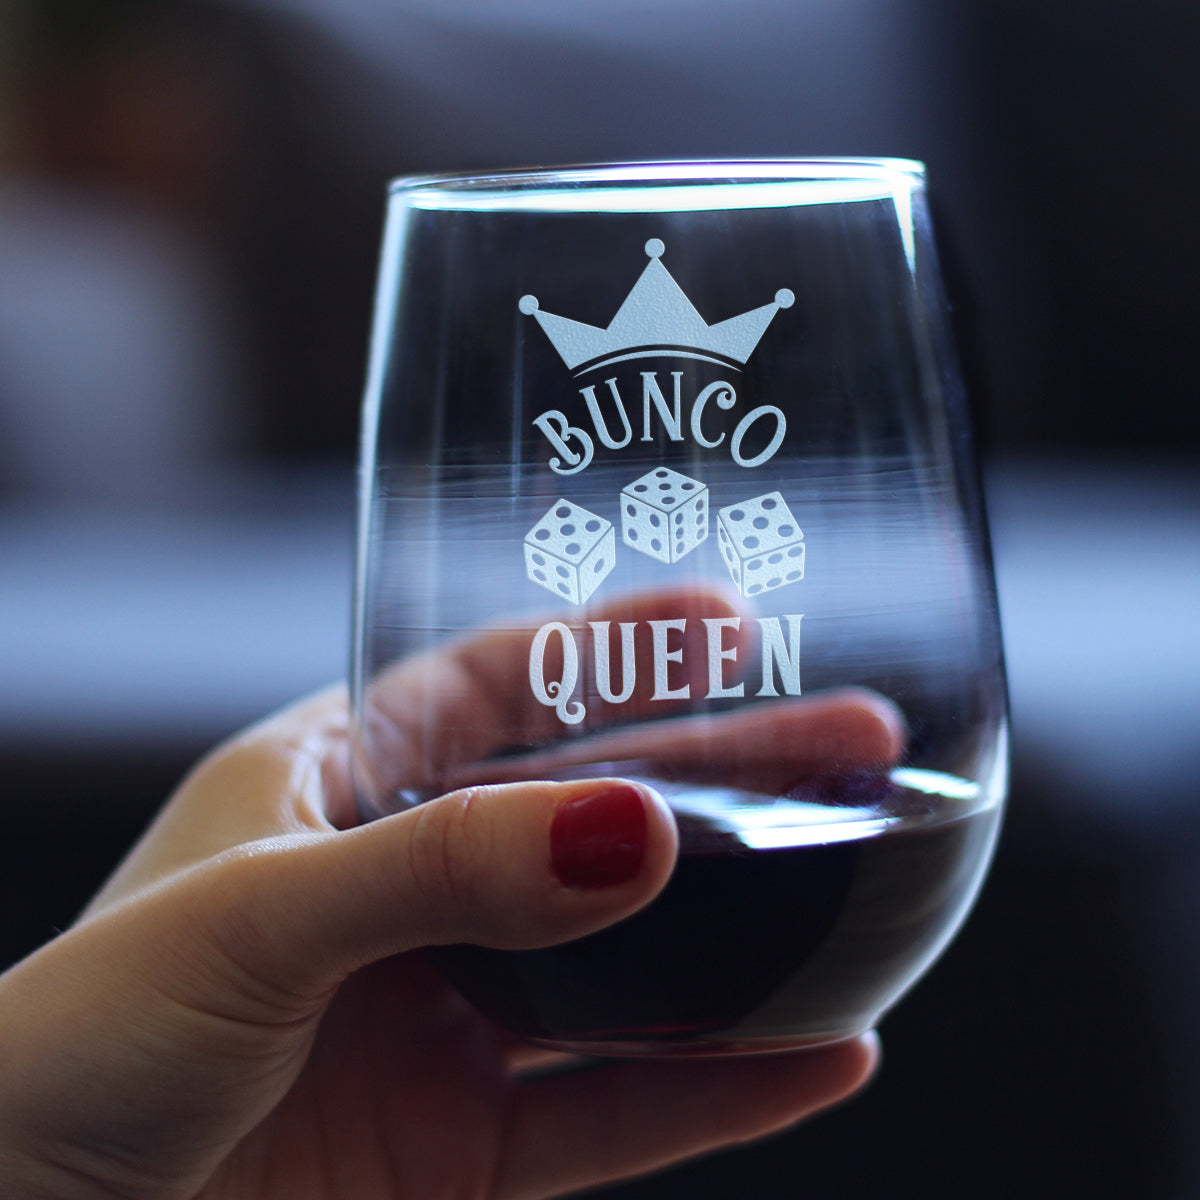 Bunco Queen Stemless Wine Glass - Bunco Decor and Bunco Gifts for Women - Large 17 Oz Glasses